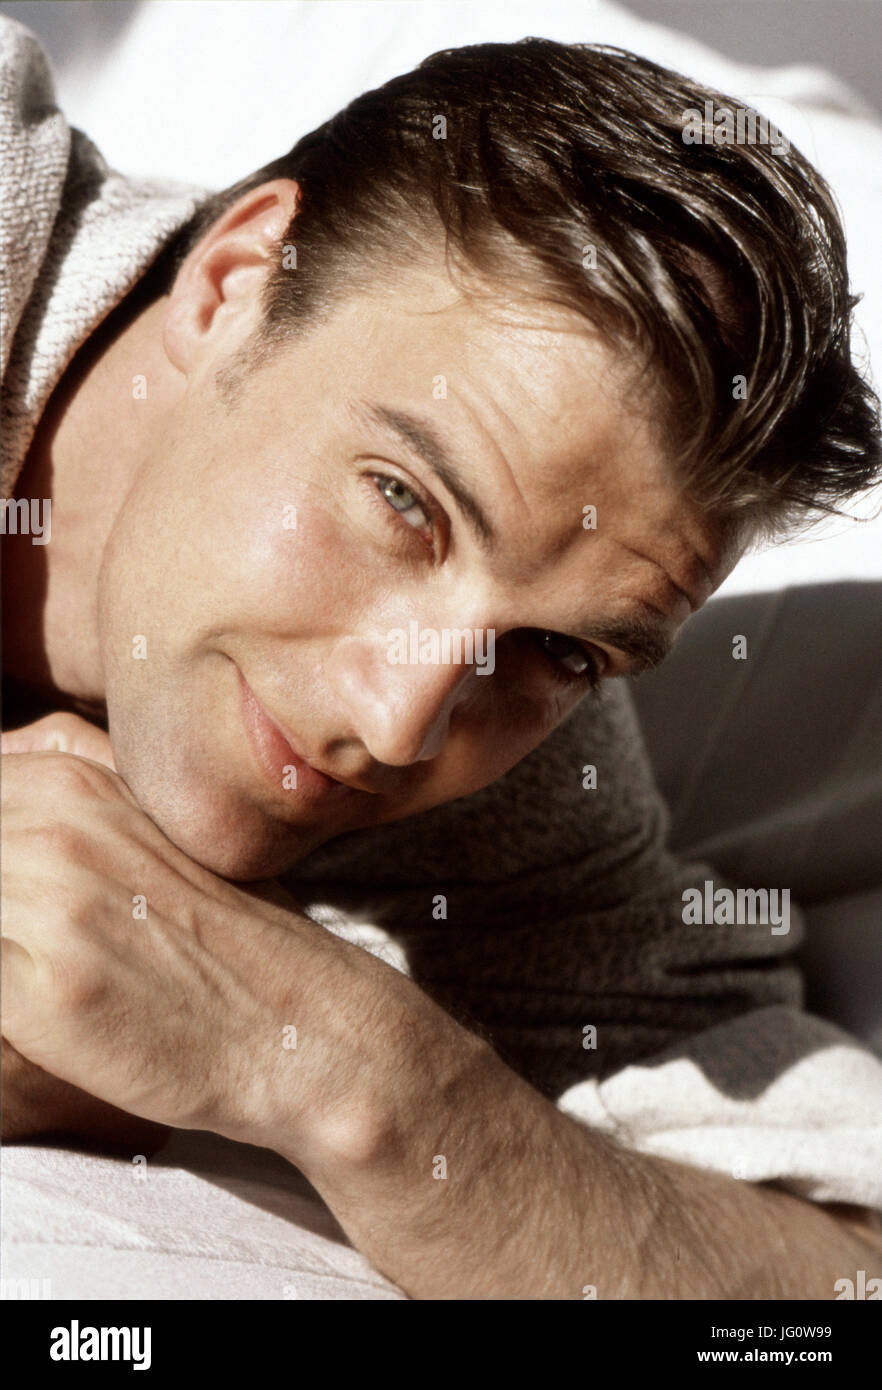 Attractive smiling man Stock Photo